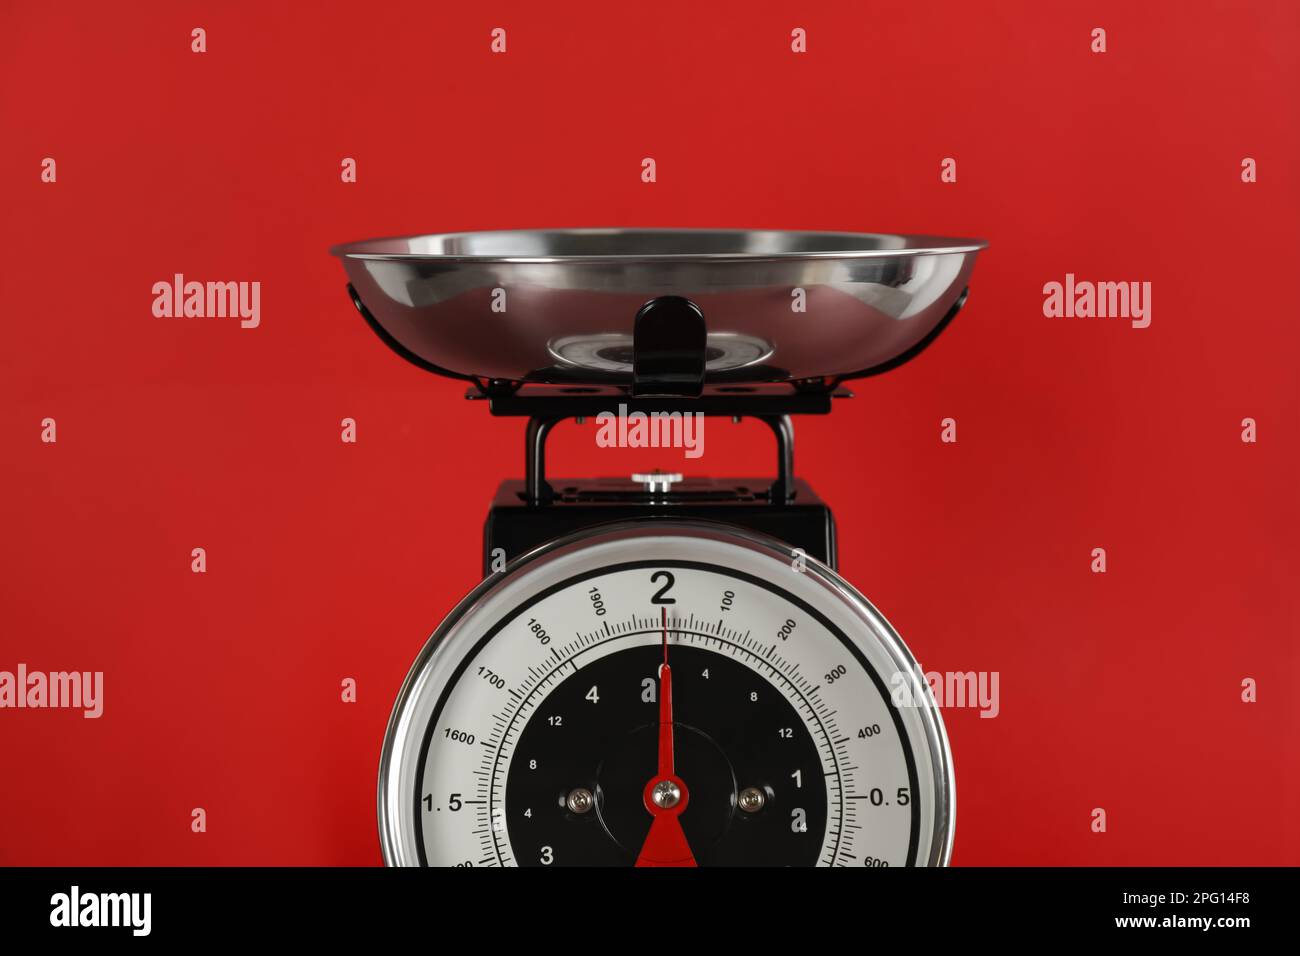 https://c8.alamy.com/comp/2PG14F8/retro-mechanical-kitchen-scale-on-red-background-closeup-2PG14F8.jpg